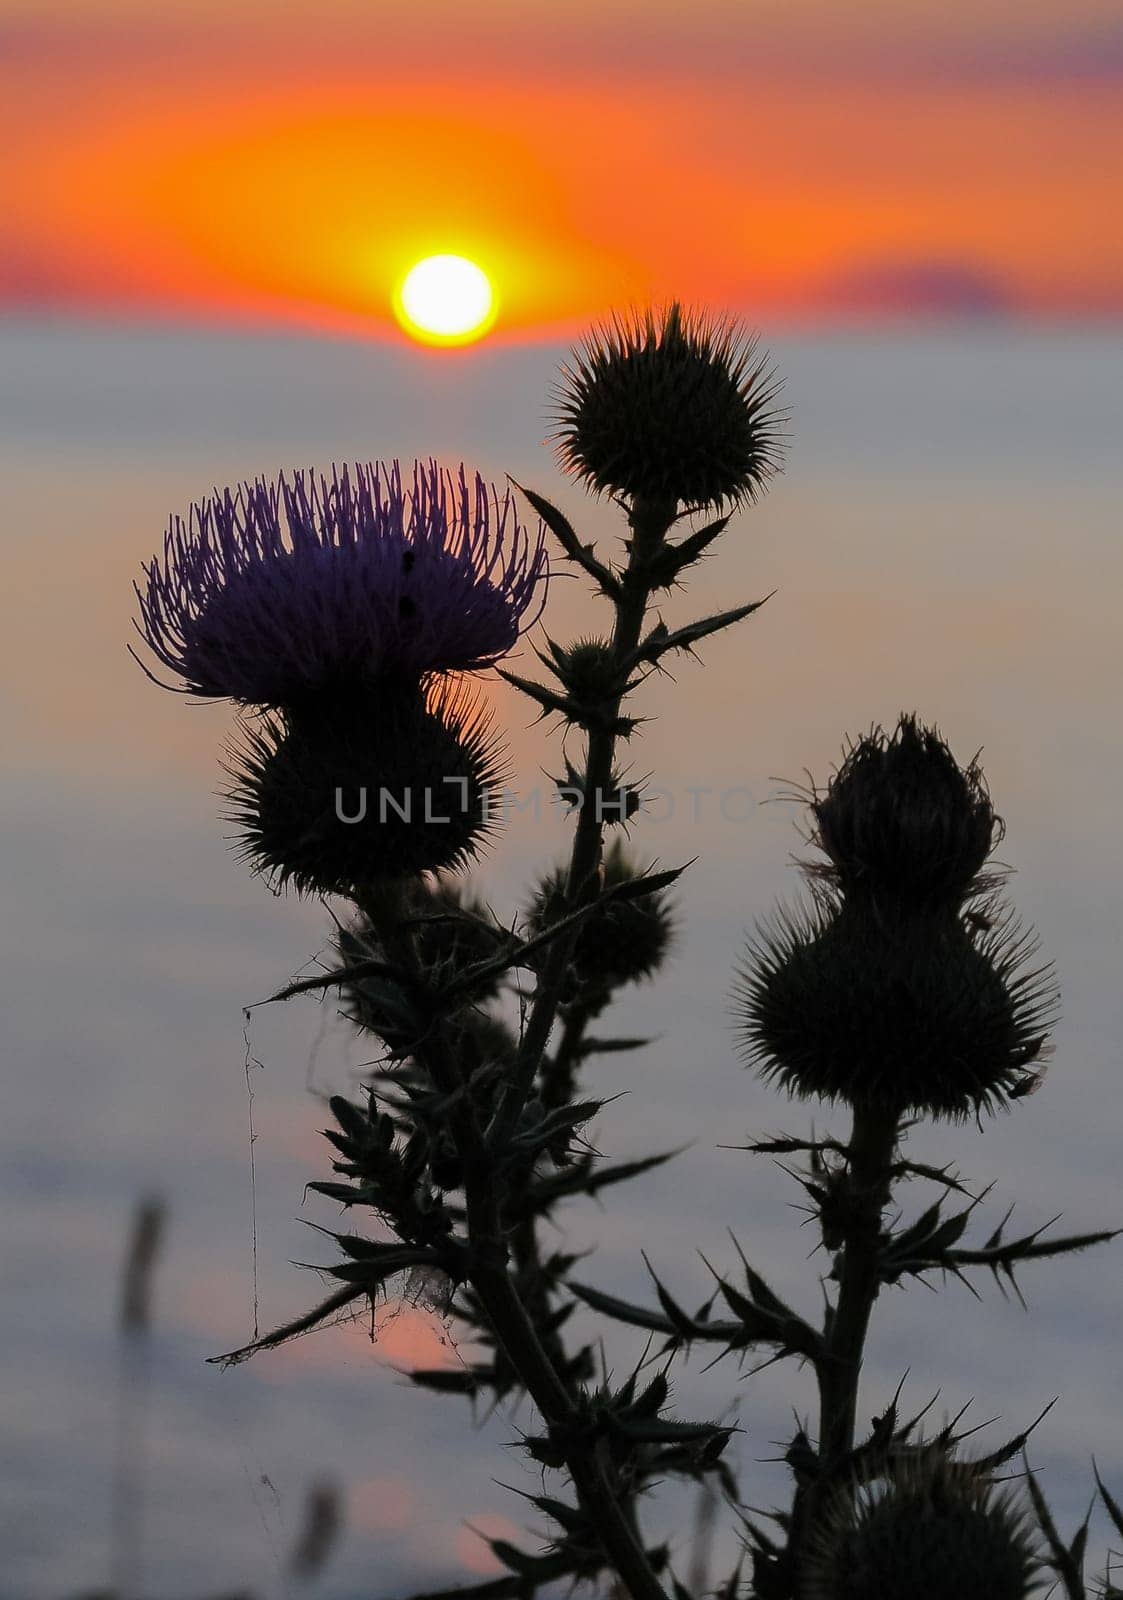 Thistle against the red sunset over the Black Sea in the Eastern Crimea by Hydrobiolog